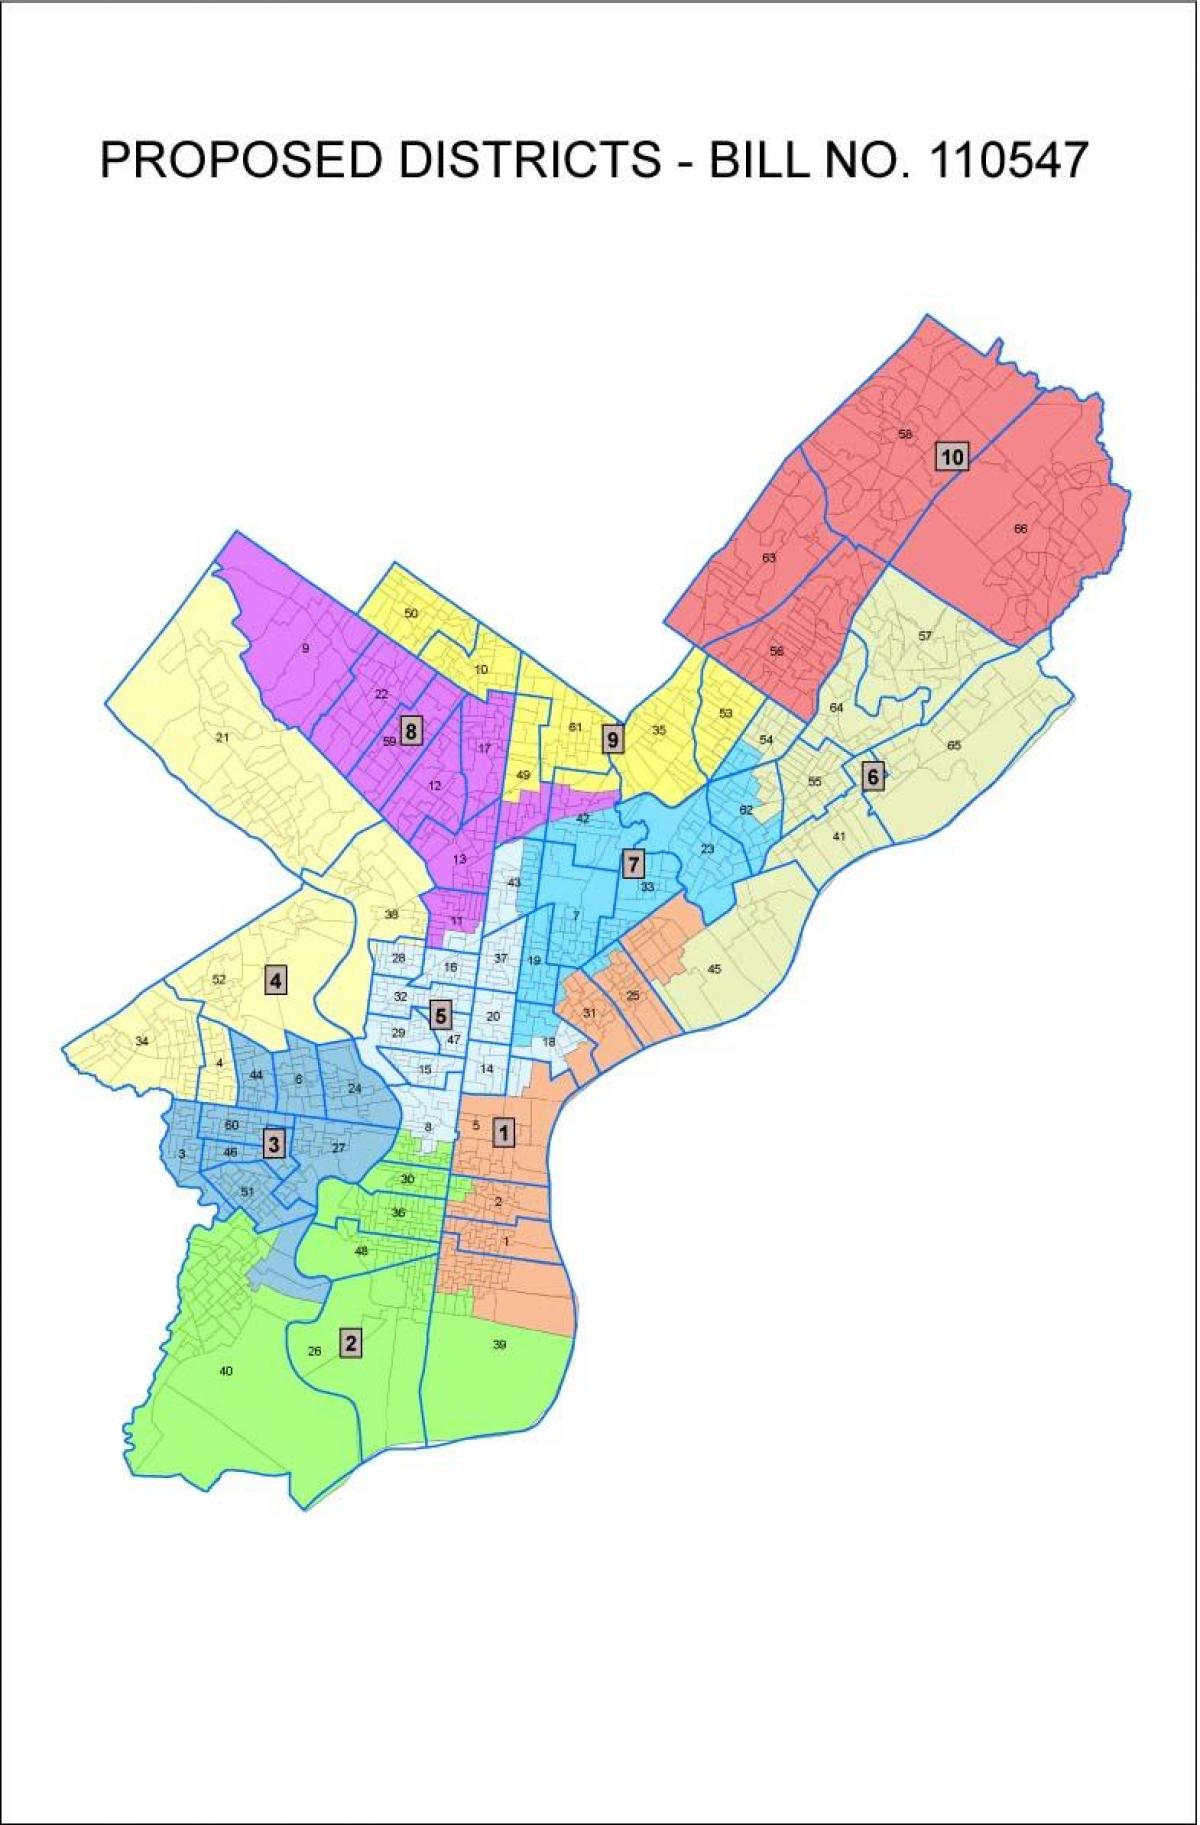 map of Philly area